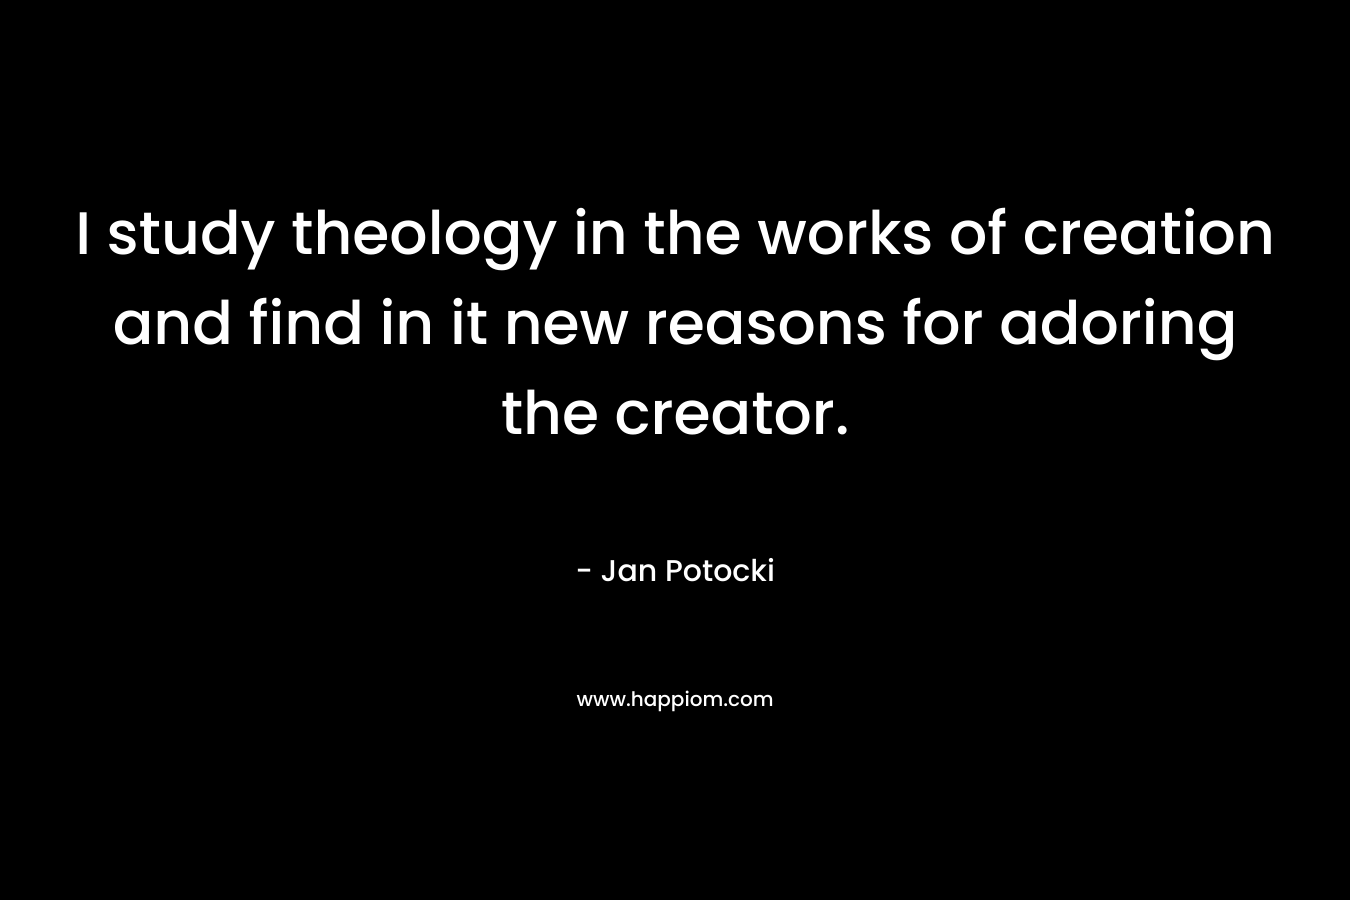 I study theology in the works of creation and find in it new reasons for adoring the creator. – Jan Potocki